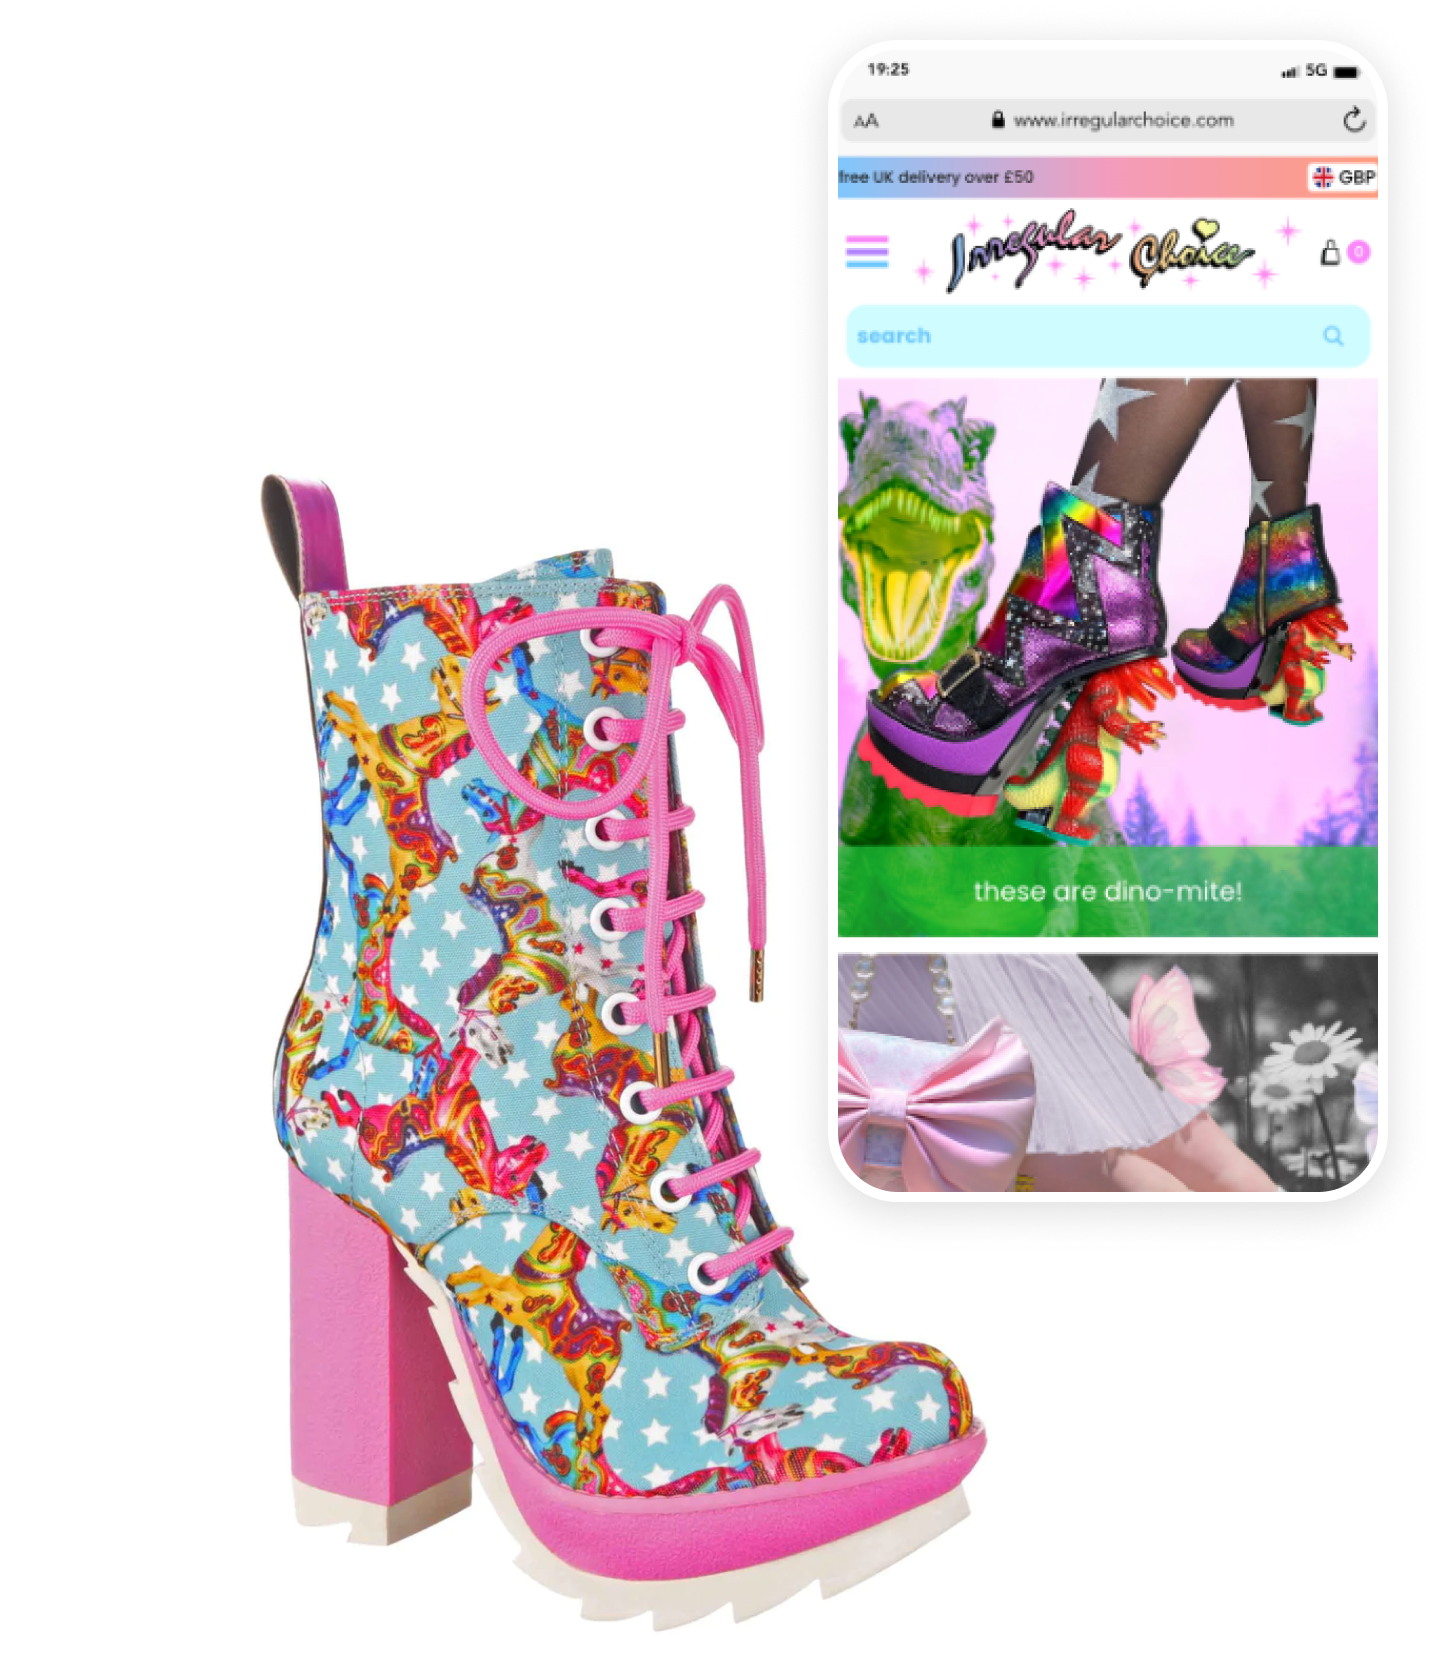 Irregular Choice Products and Mobile Website